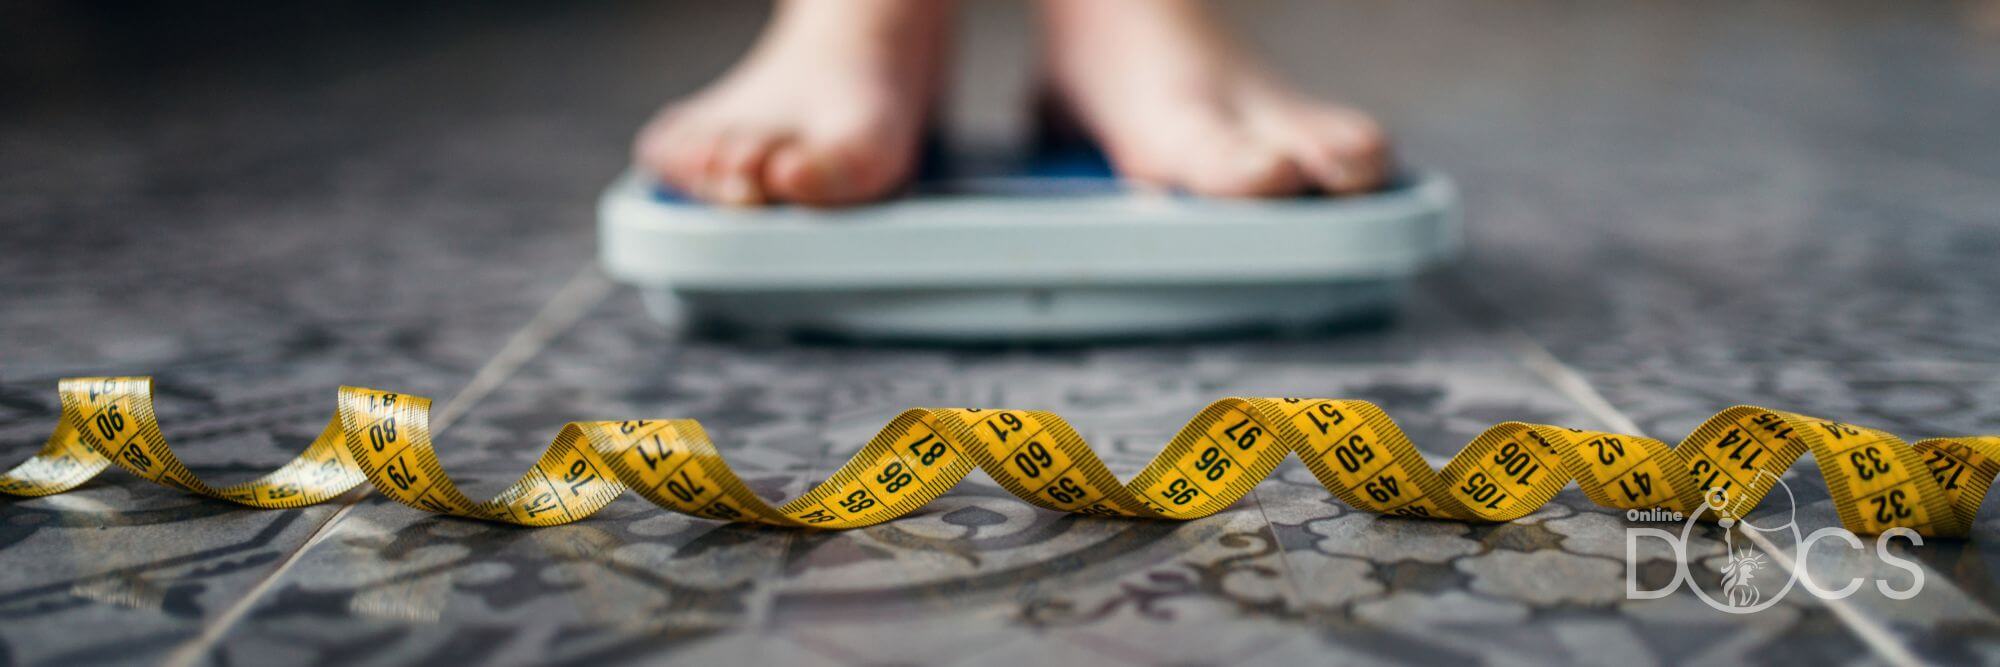 Eating Disorders Types Warning Signs And Treatments